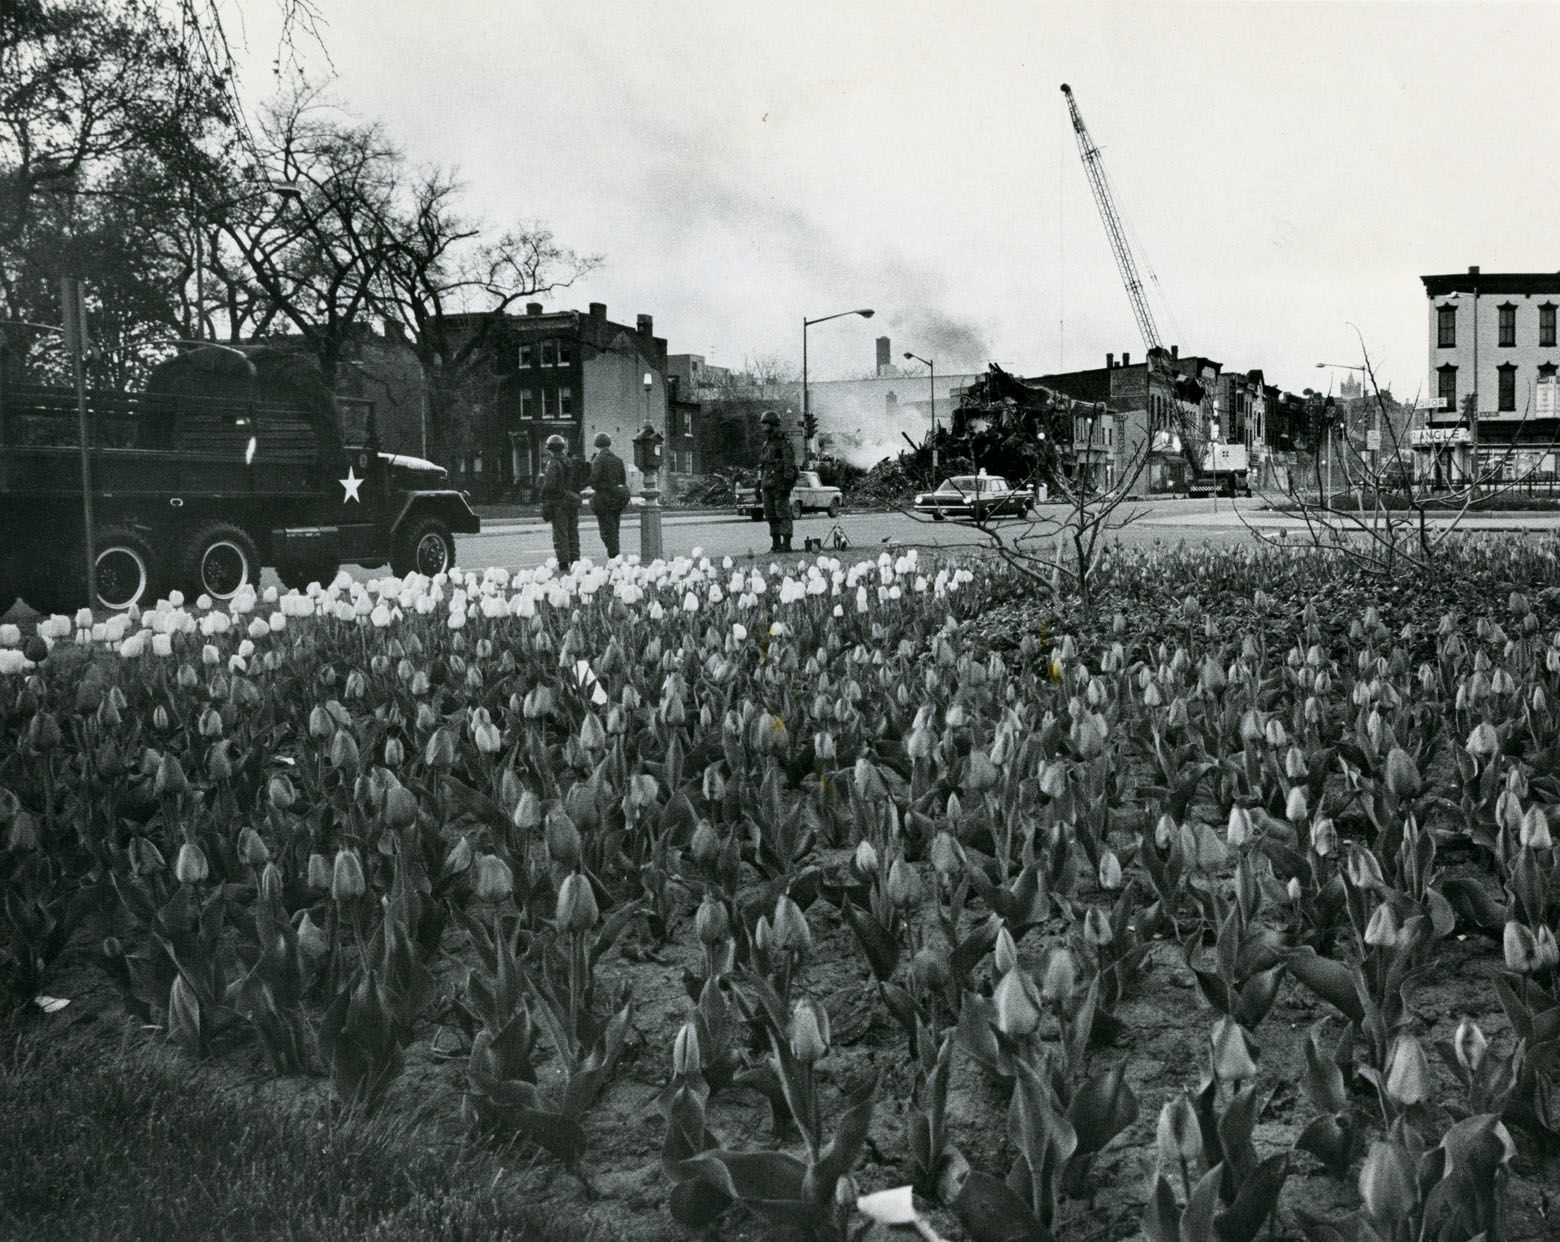 April tulips mingle in the shadow of smoldering ruins and armed troops. Reprinted with permission of the DC Public Library, Star Collection, © Washington Post.